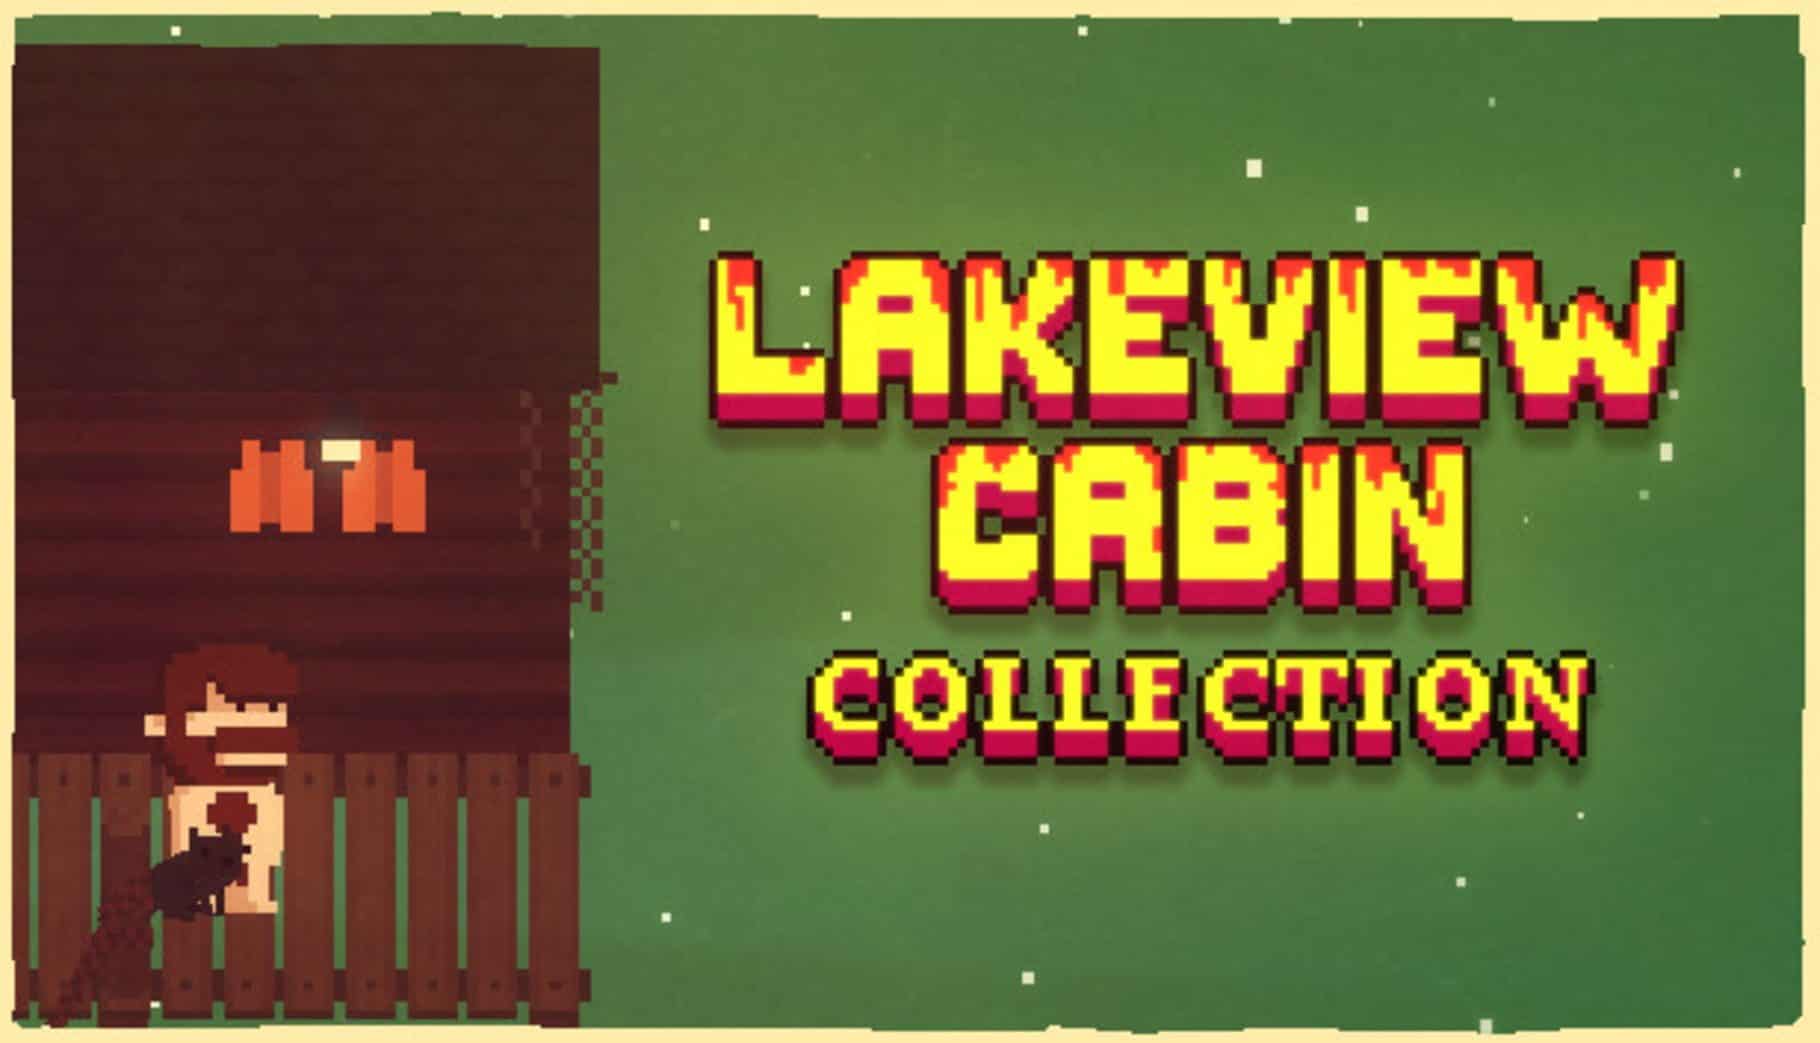 Buy Lakeview Cabin Collection Steam Key RU/CIS - Cheap - !